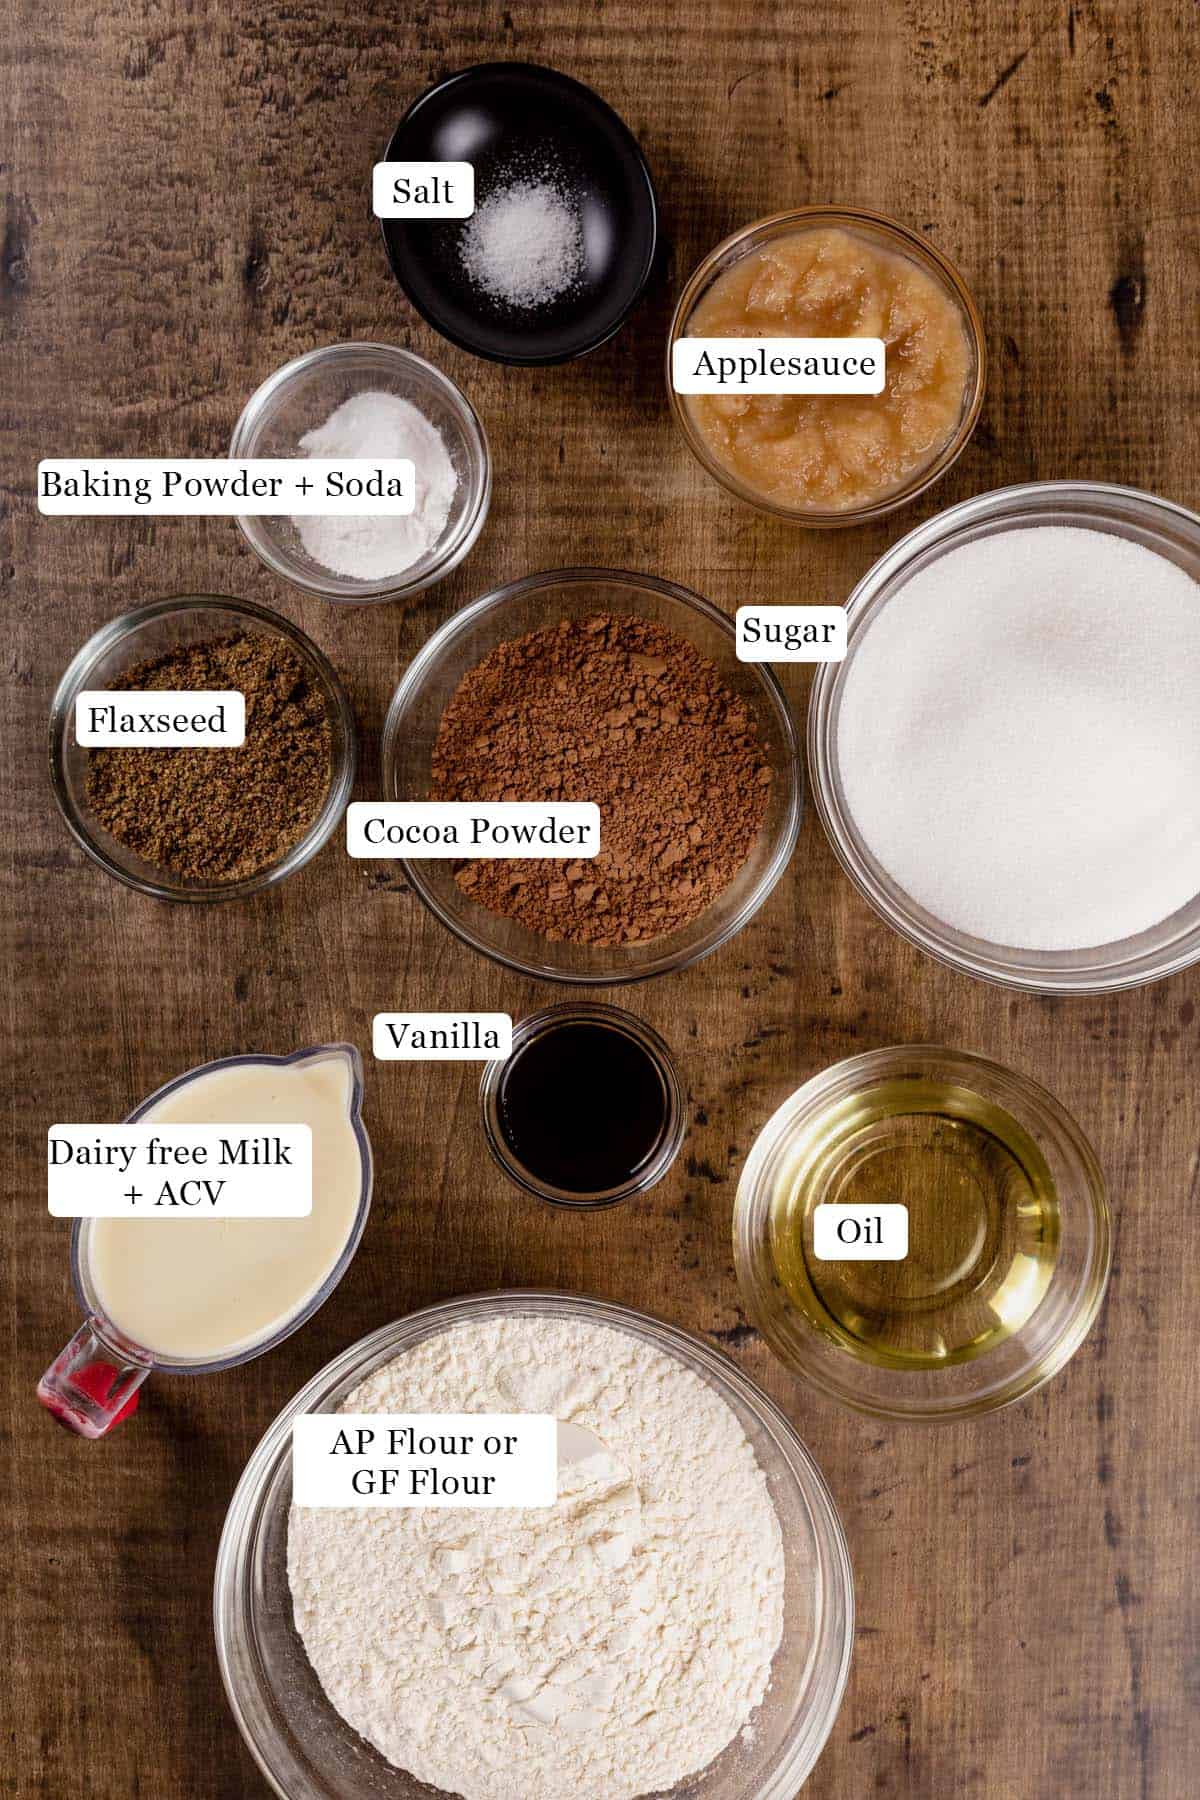 Ingredients for a vegan chocolate sheet cake in various glass bowls on a wood table. Black and white labels have been added to name each ingredient like flour, cocoa powder, and applesauce.